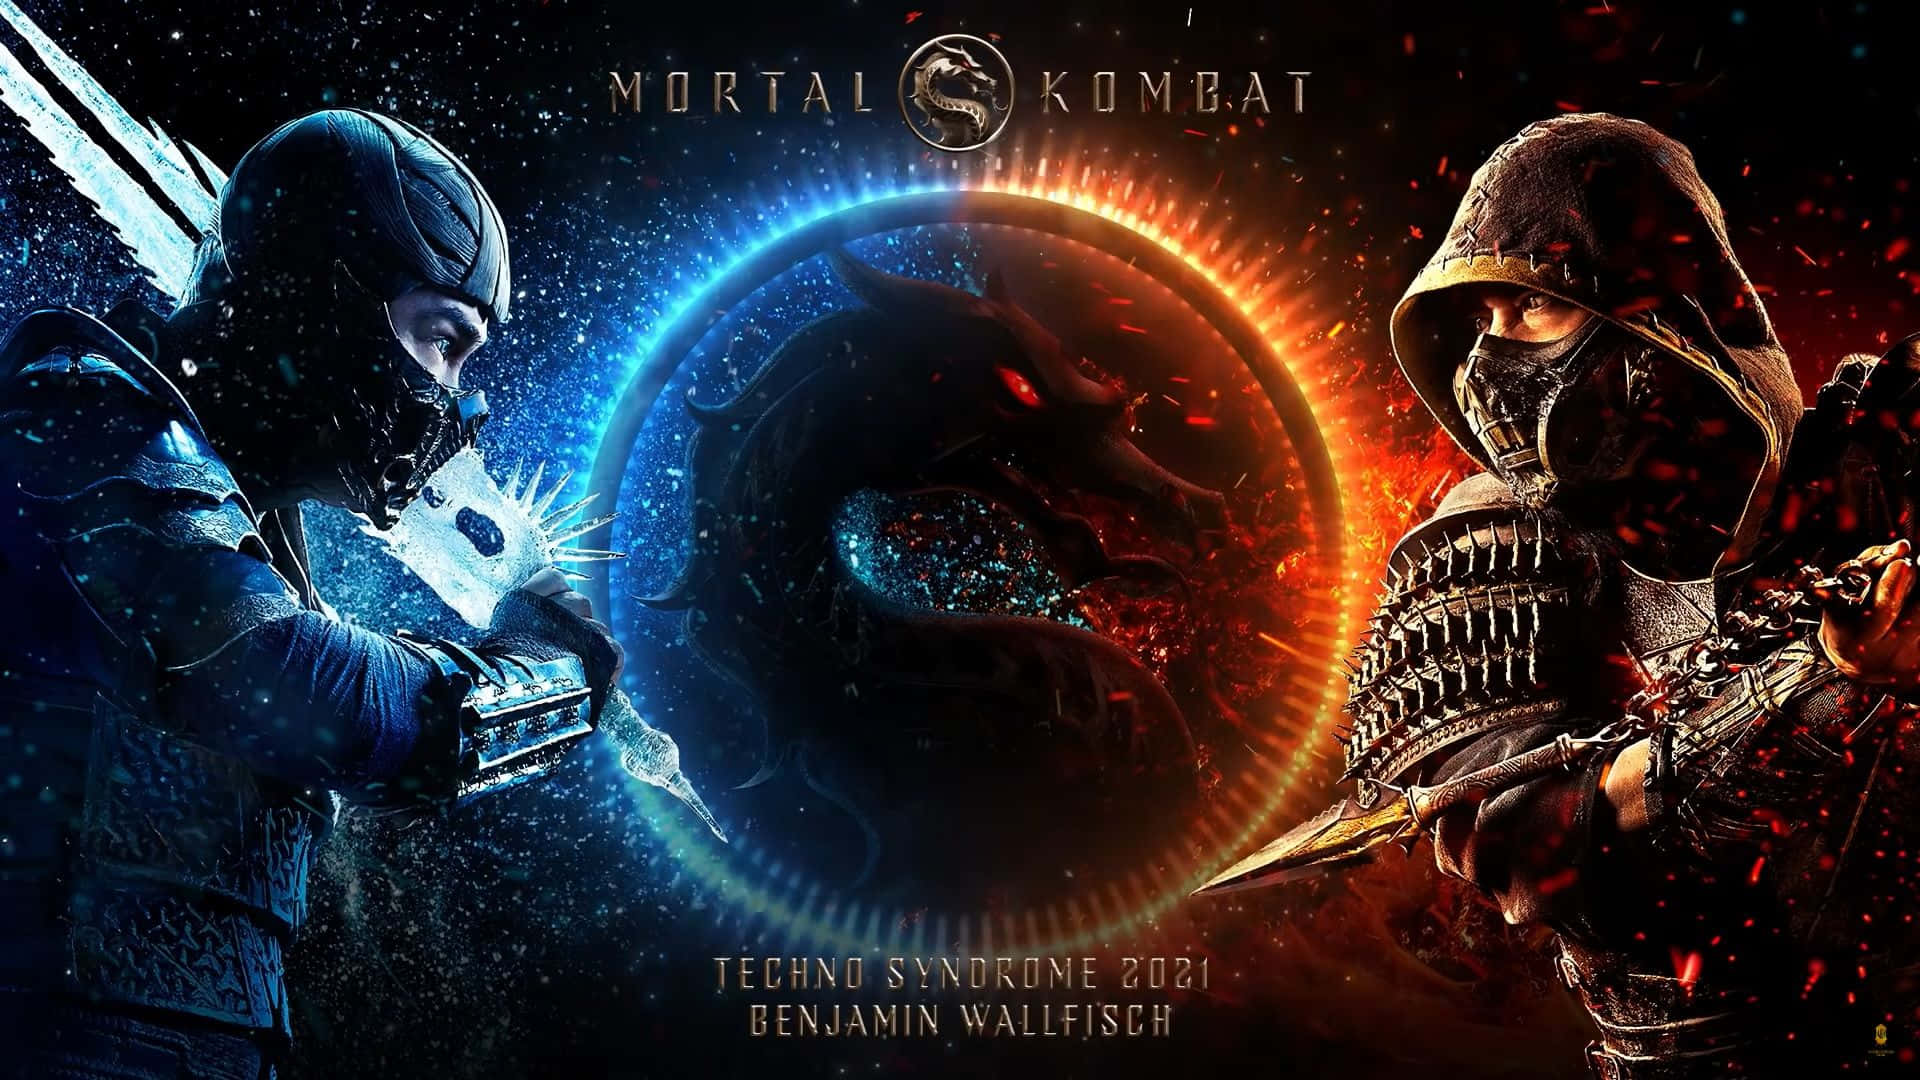 "Experience the next installment of the legendary fighting franchise as Scorpion takes Back his Throne in Mortal Kombat 2021" Wallpaper